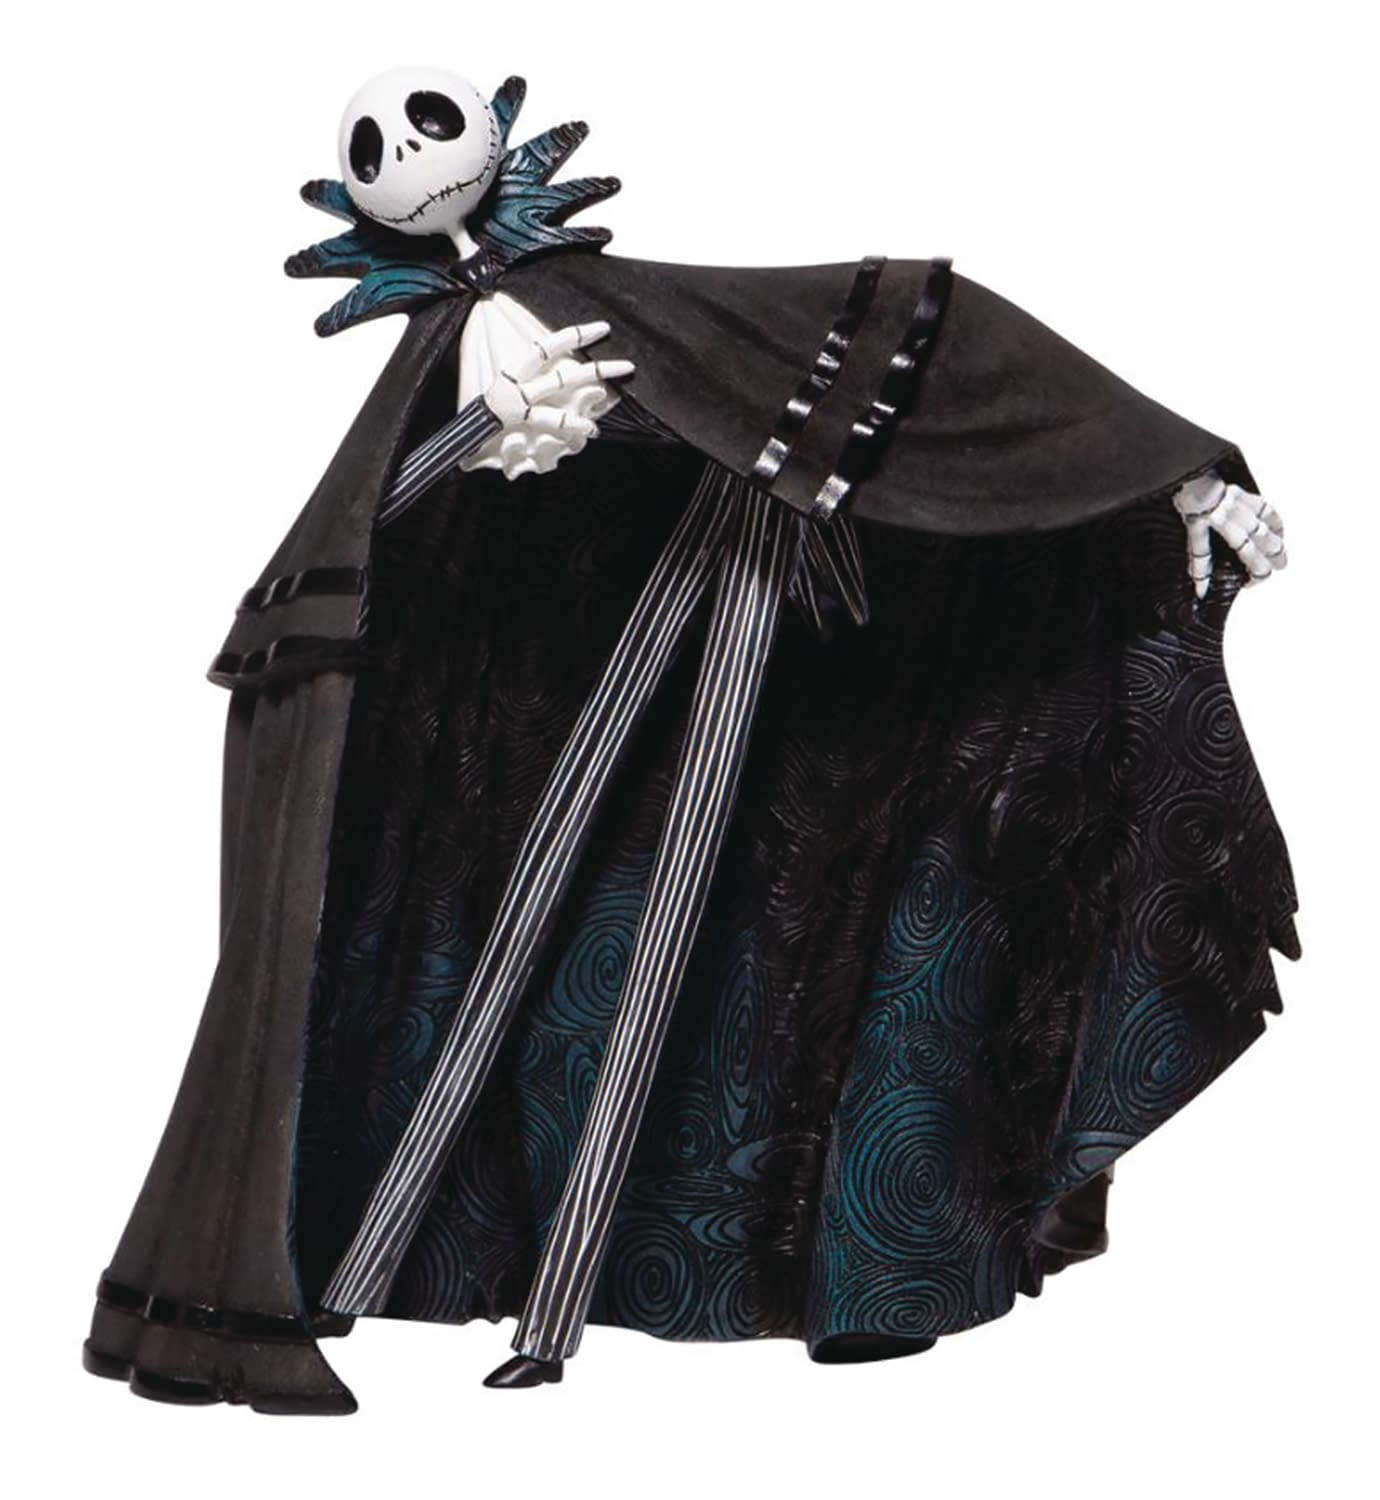 "Nightmare Before Christmas" Gets Fancy with New Enesco Statues 